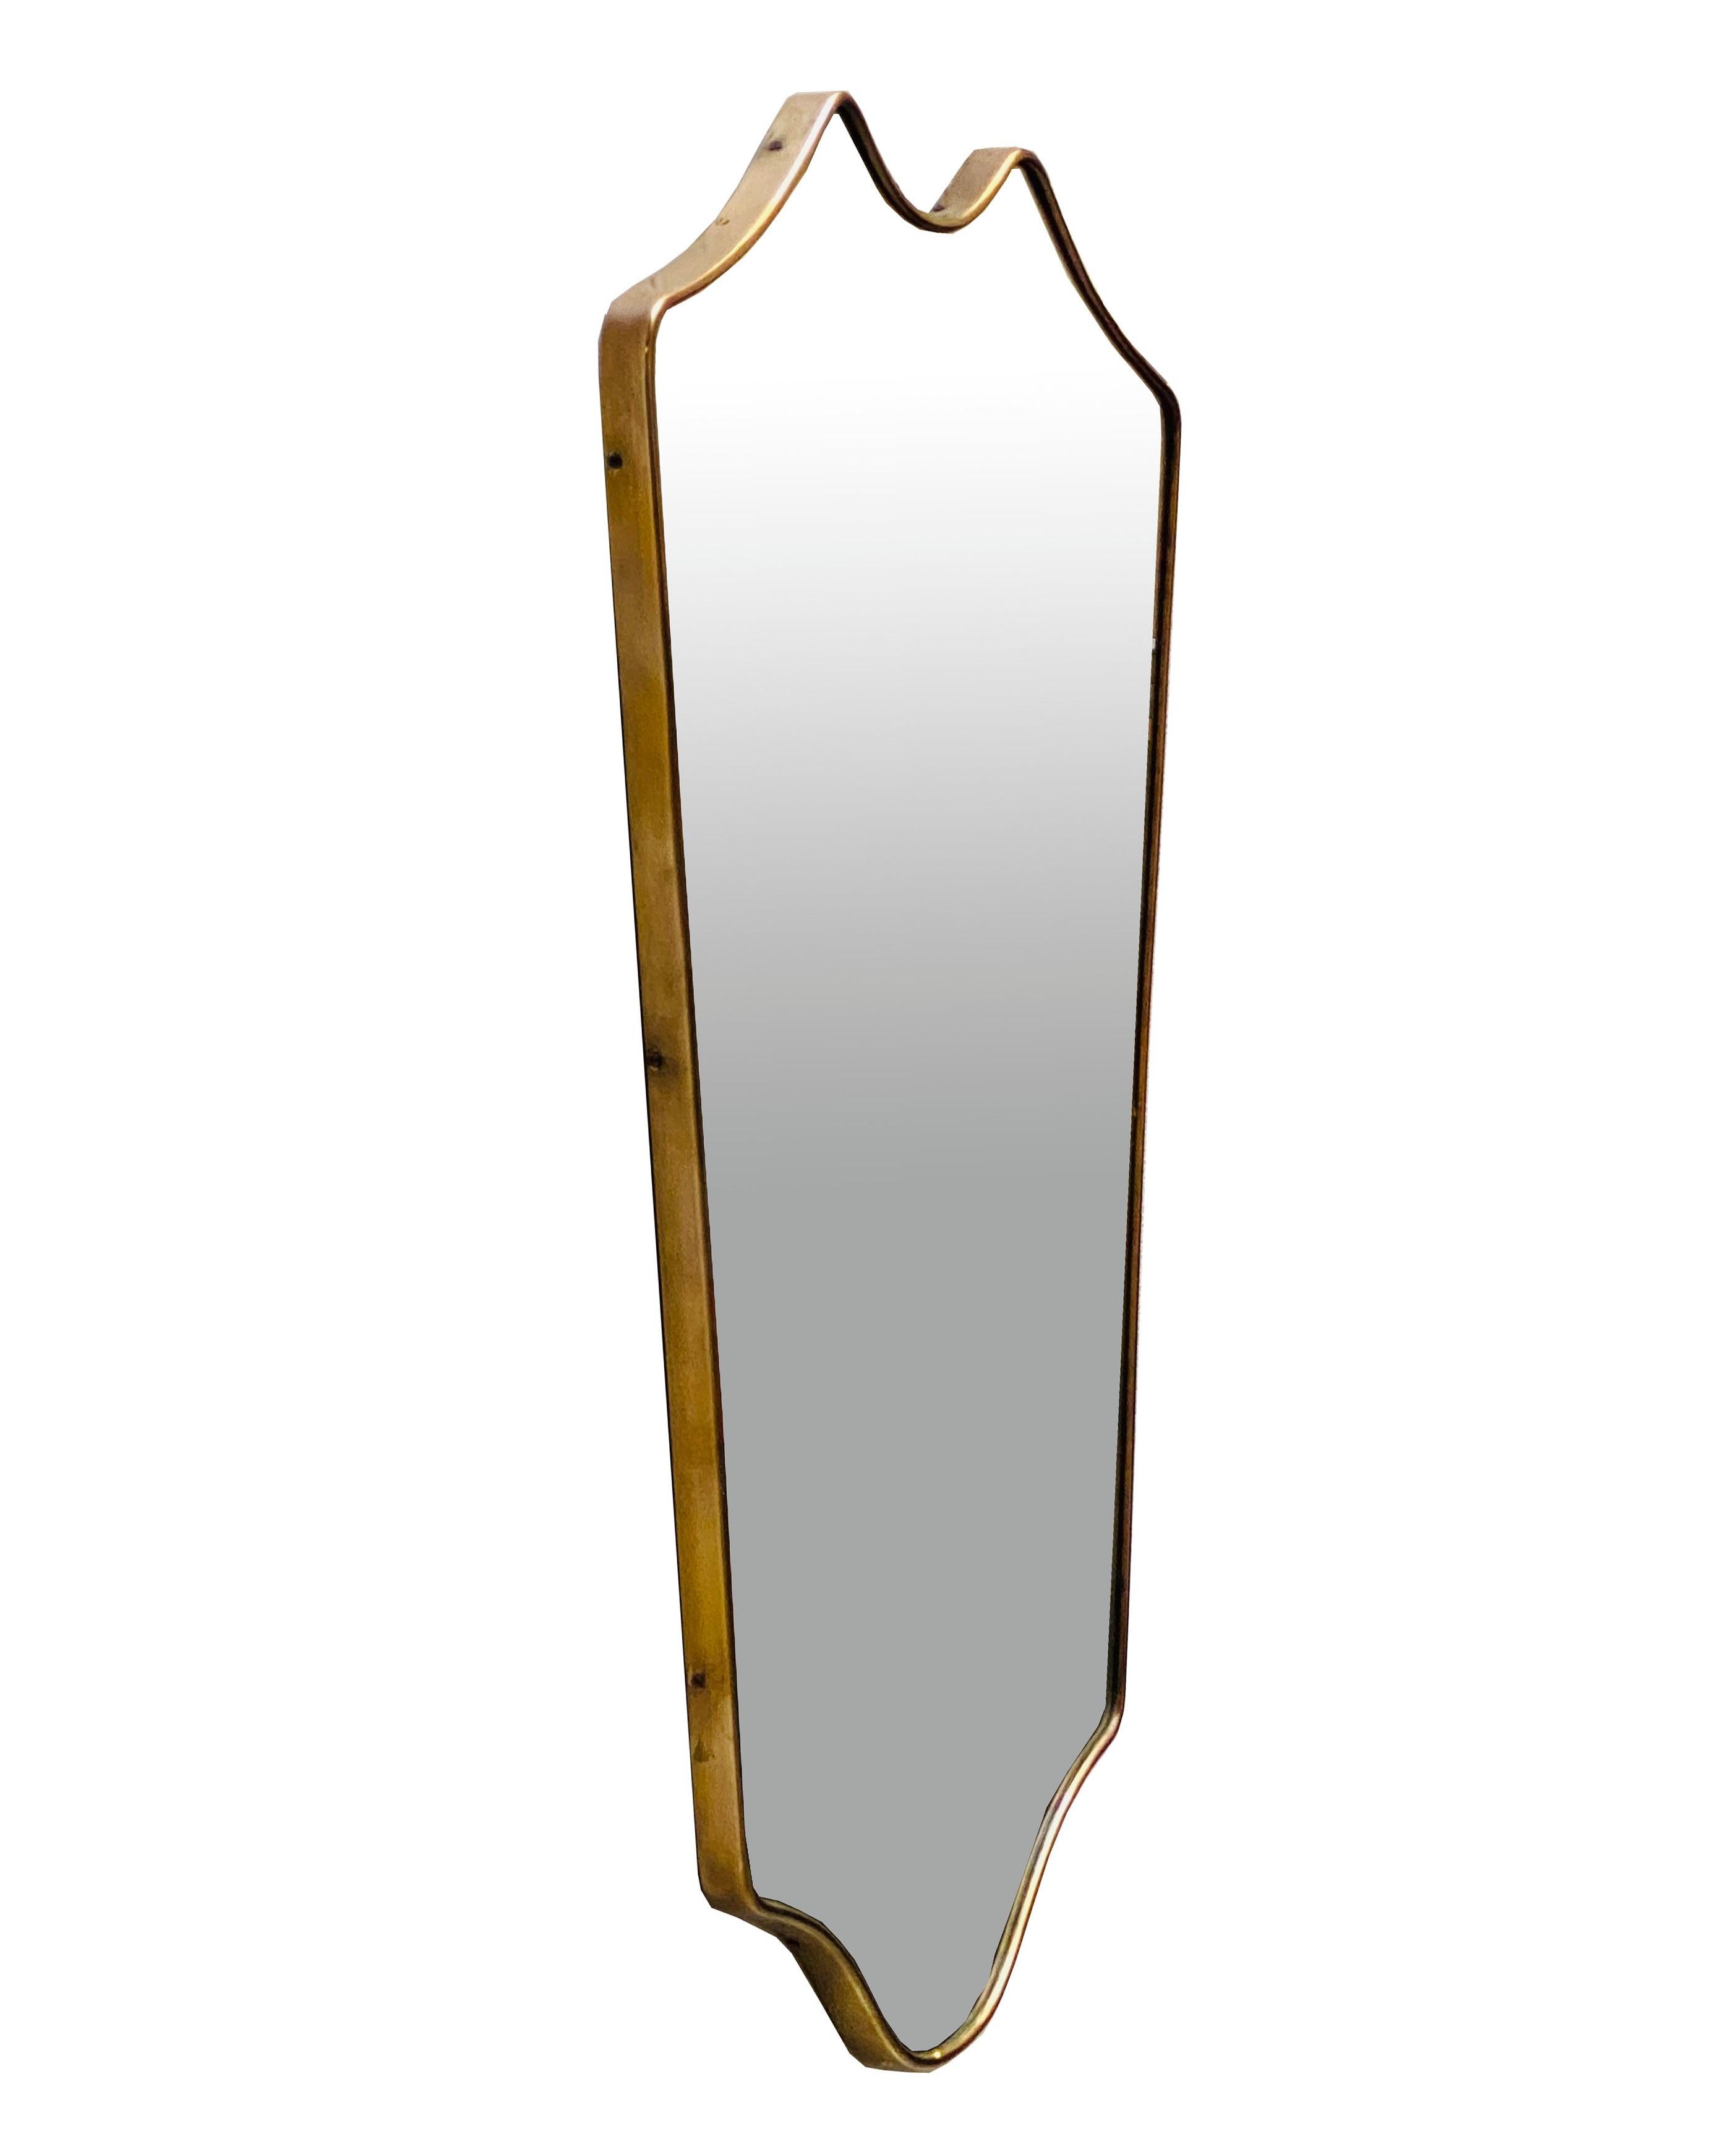 Elegant and solid wall mirror of considerable size, made in Italy, 1950s. The mirror glass is framed in brass. 
Other designers of the period include Gio Ponti, Fontana Arte, Max Ingrand, Franco Albini, and Josef Frank.Mid-century Italian wall